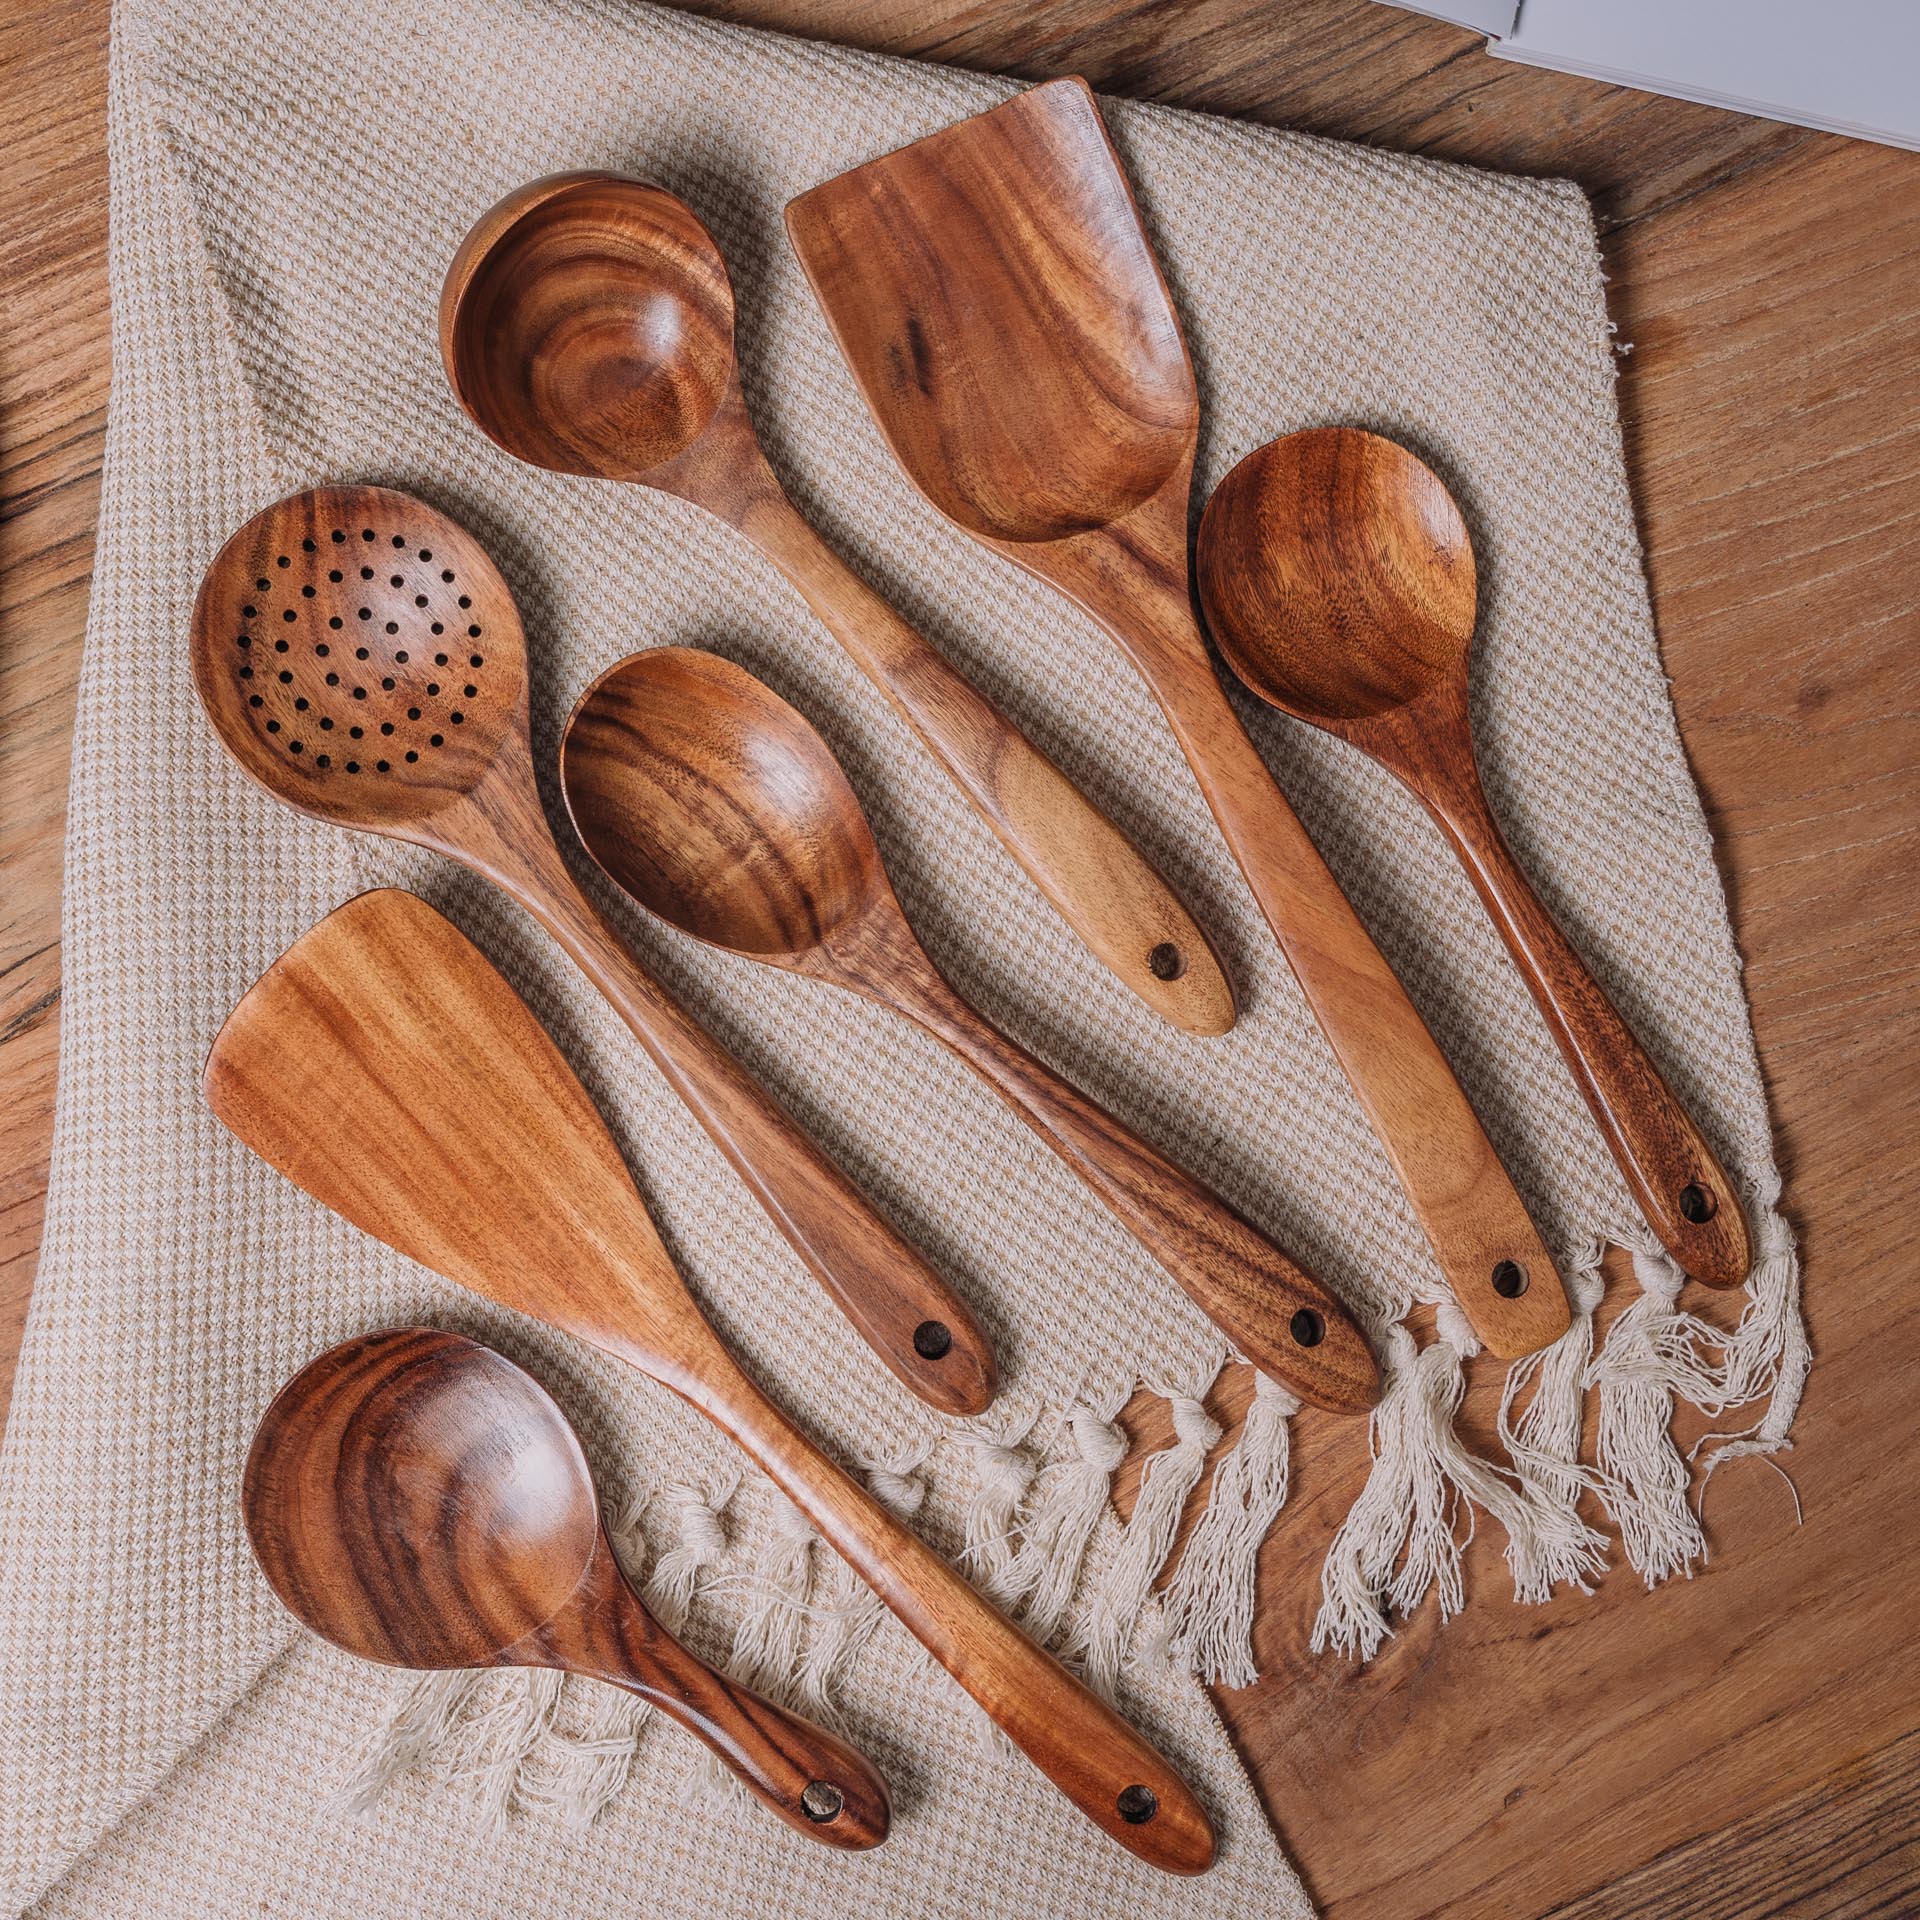 Are Wooden Utensils Good? Everything You Need to Know